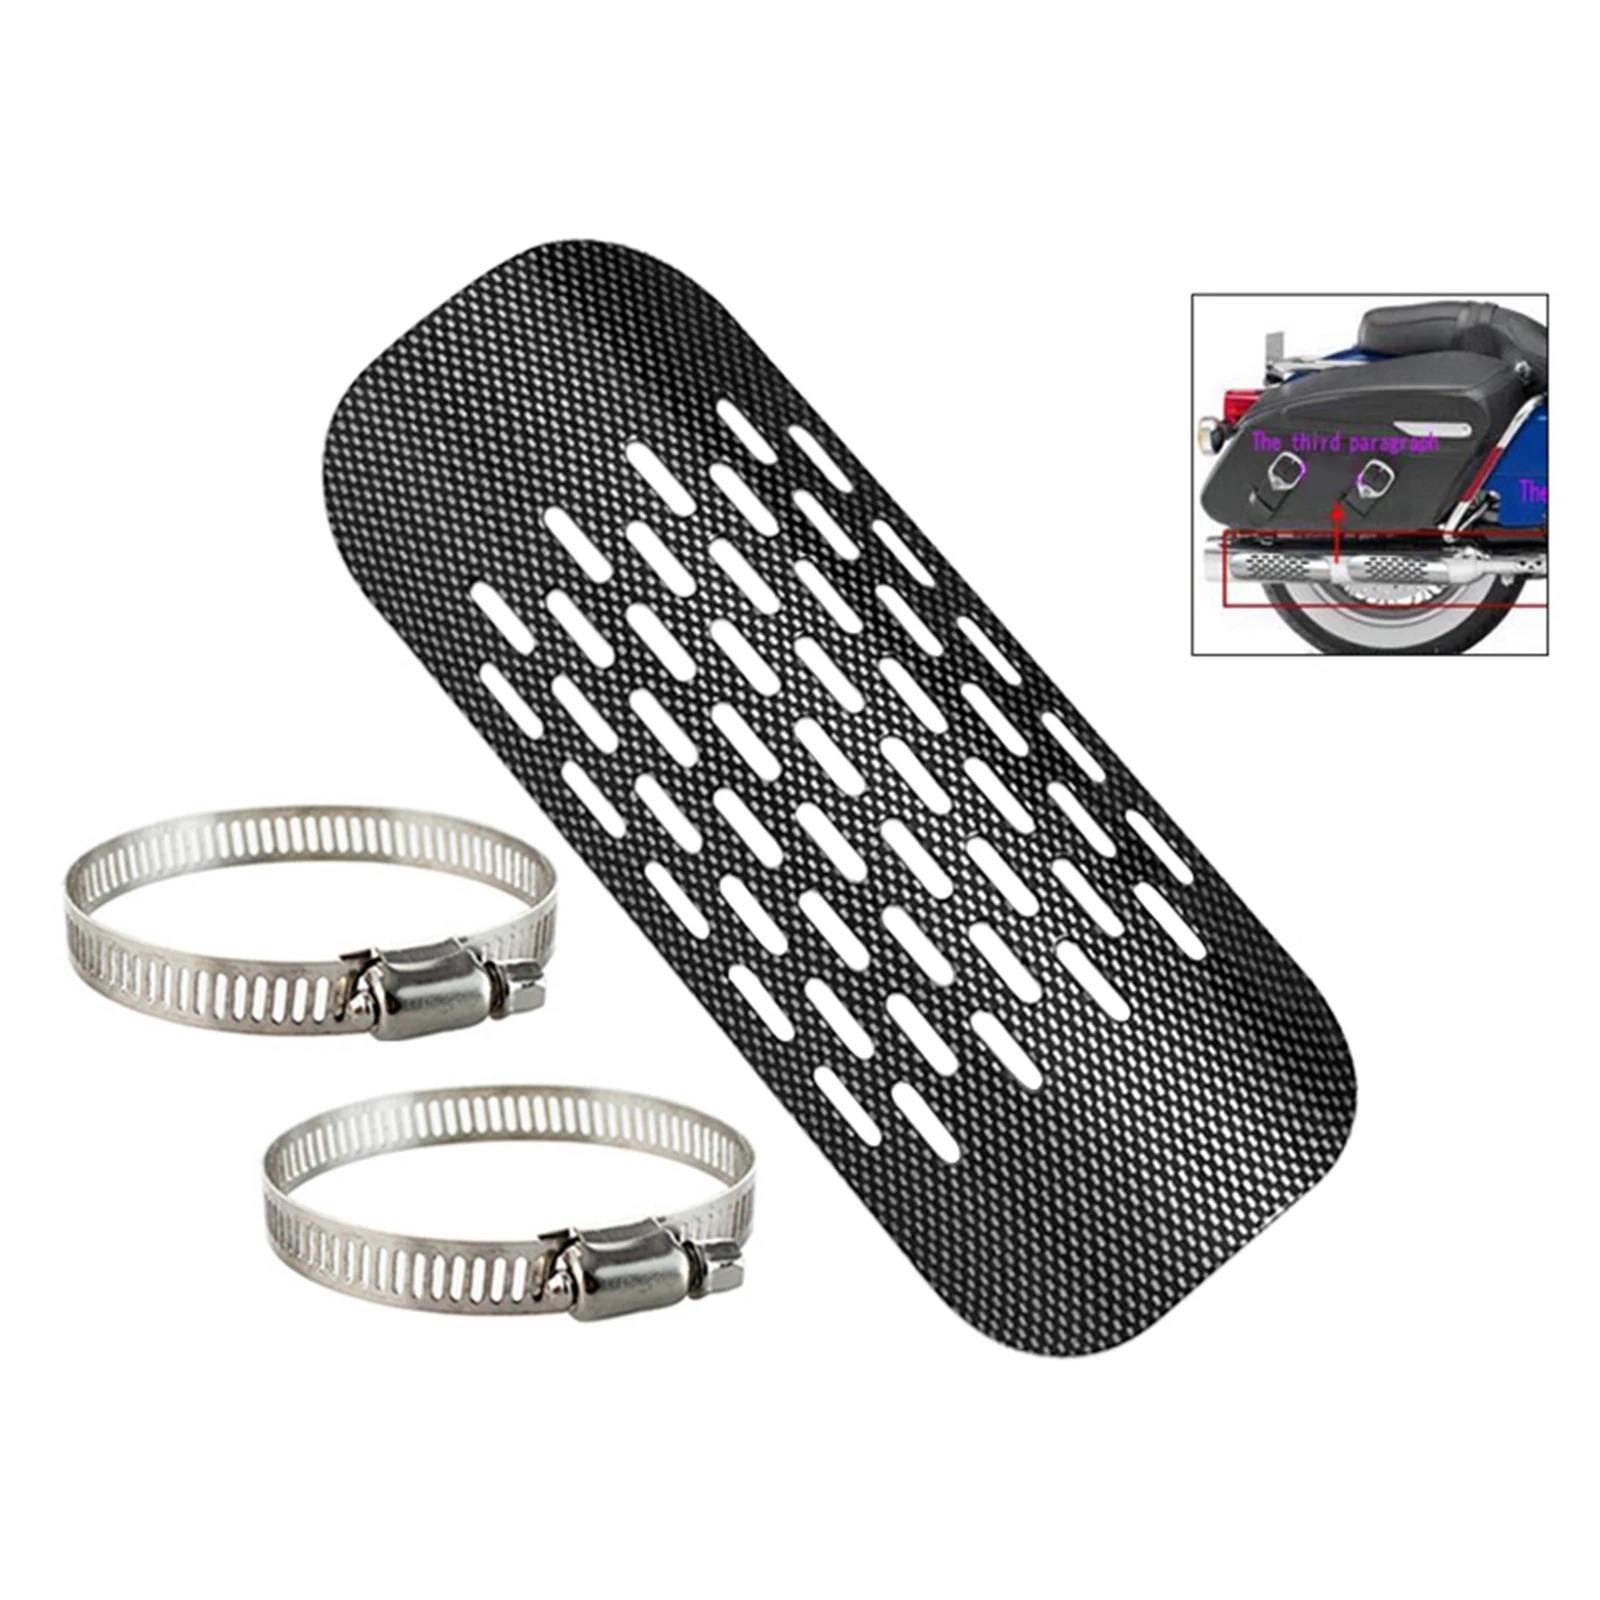 Motorcycle Exhaust Heat Shield Black Universal Muffler Cover Guard with 2 Stainless Steel Clamps 